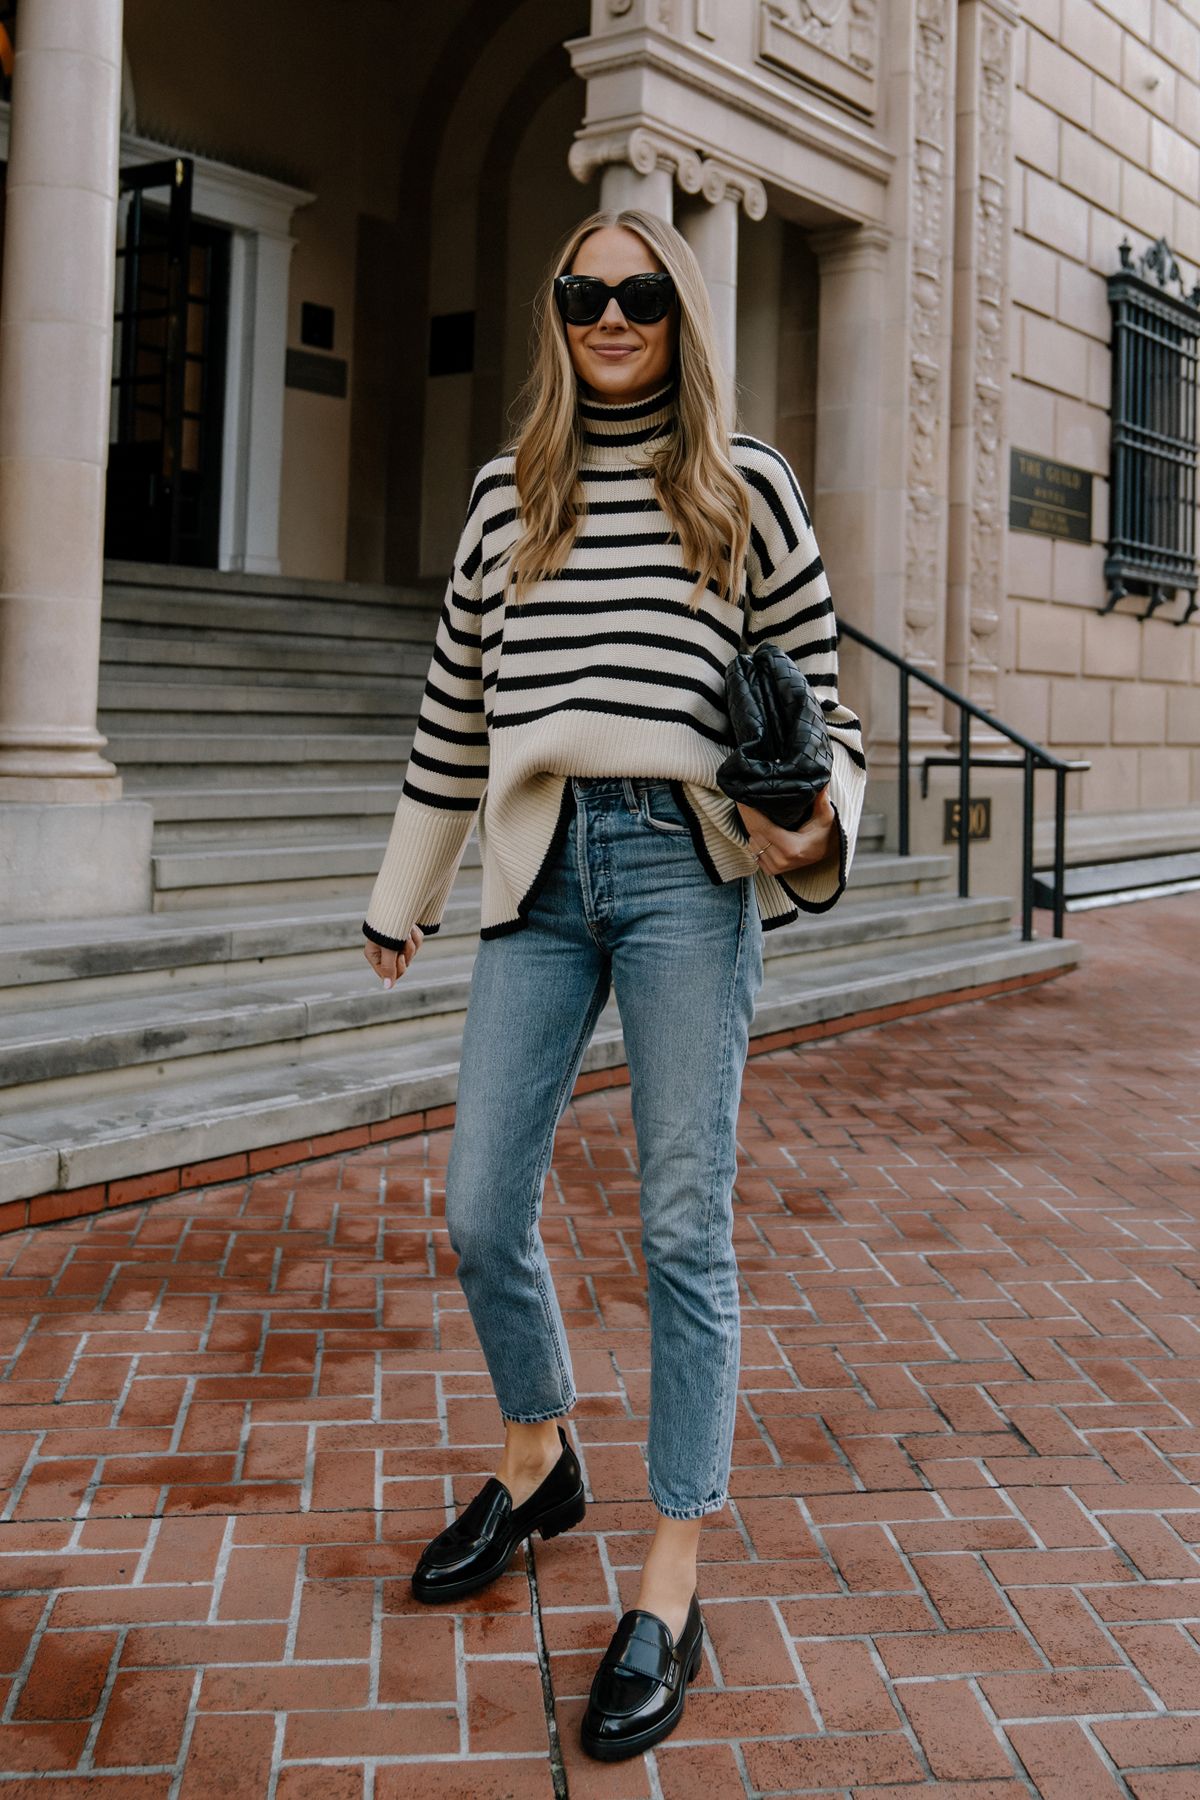 Fashion-Jackson-Wearing-Striped-Oversized-Sweater-Outfits-Black-Loafer-Outfit-AGOLDE-Jeans-Bottega-Veneta-Pouch-Black-Street-Style.jpg